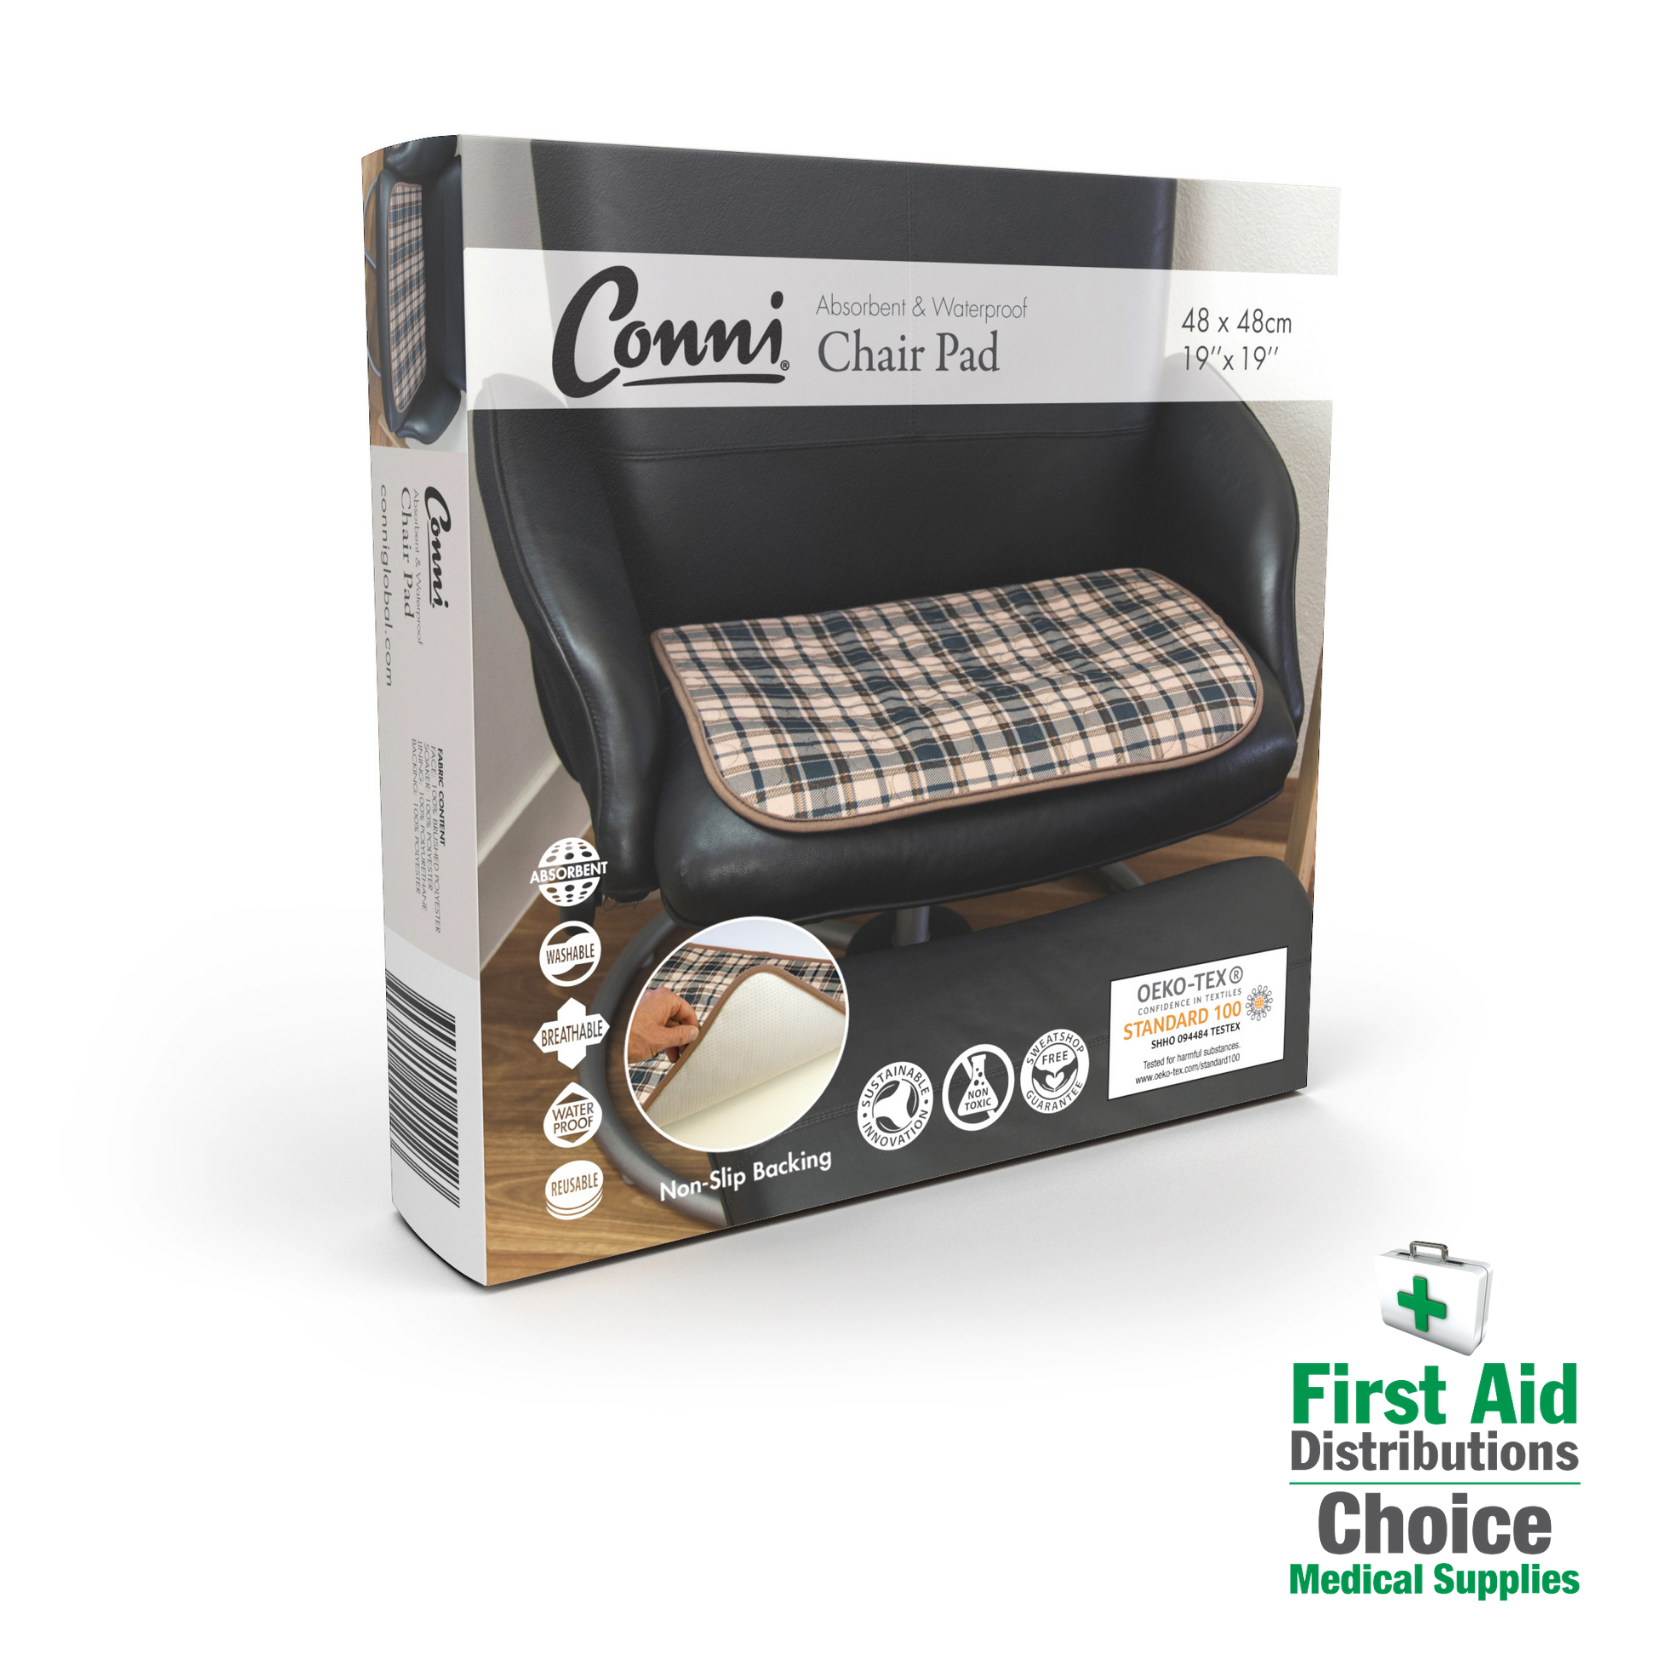 collections/Conni_Chair_Pad_Small_Tartan_First_Aid_Distributions_a3ec56b7-2bd5-4ae5-a649-69ec57dbea11.png